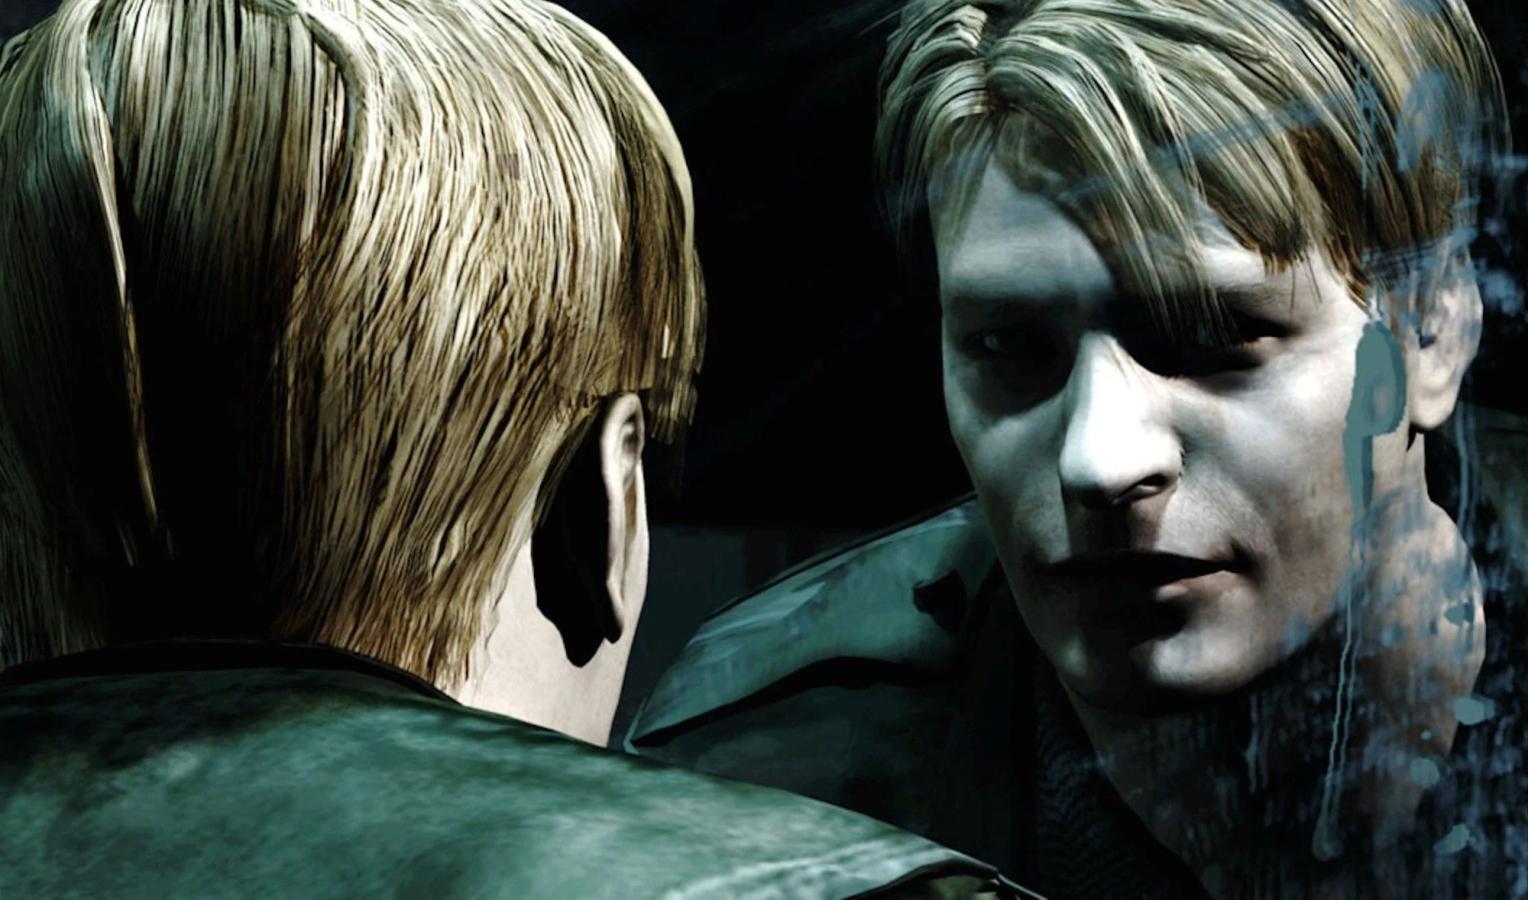 Silent Hill The Short Message is expected to debut on Wednesday.